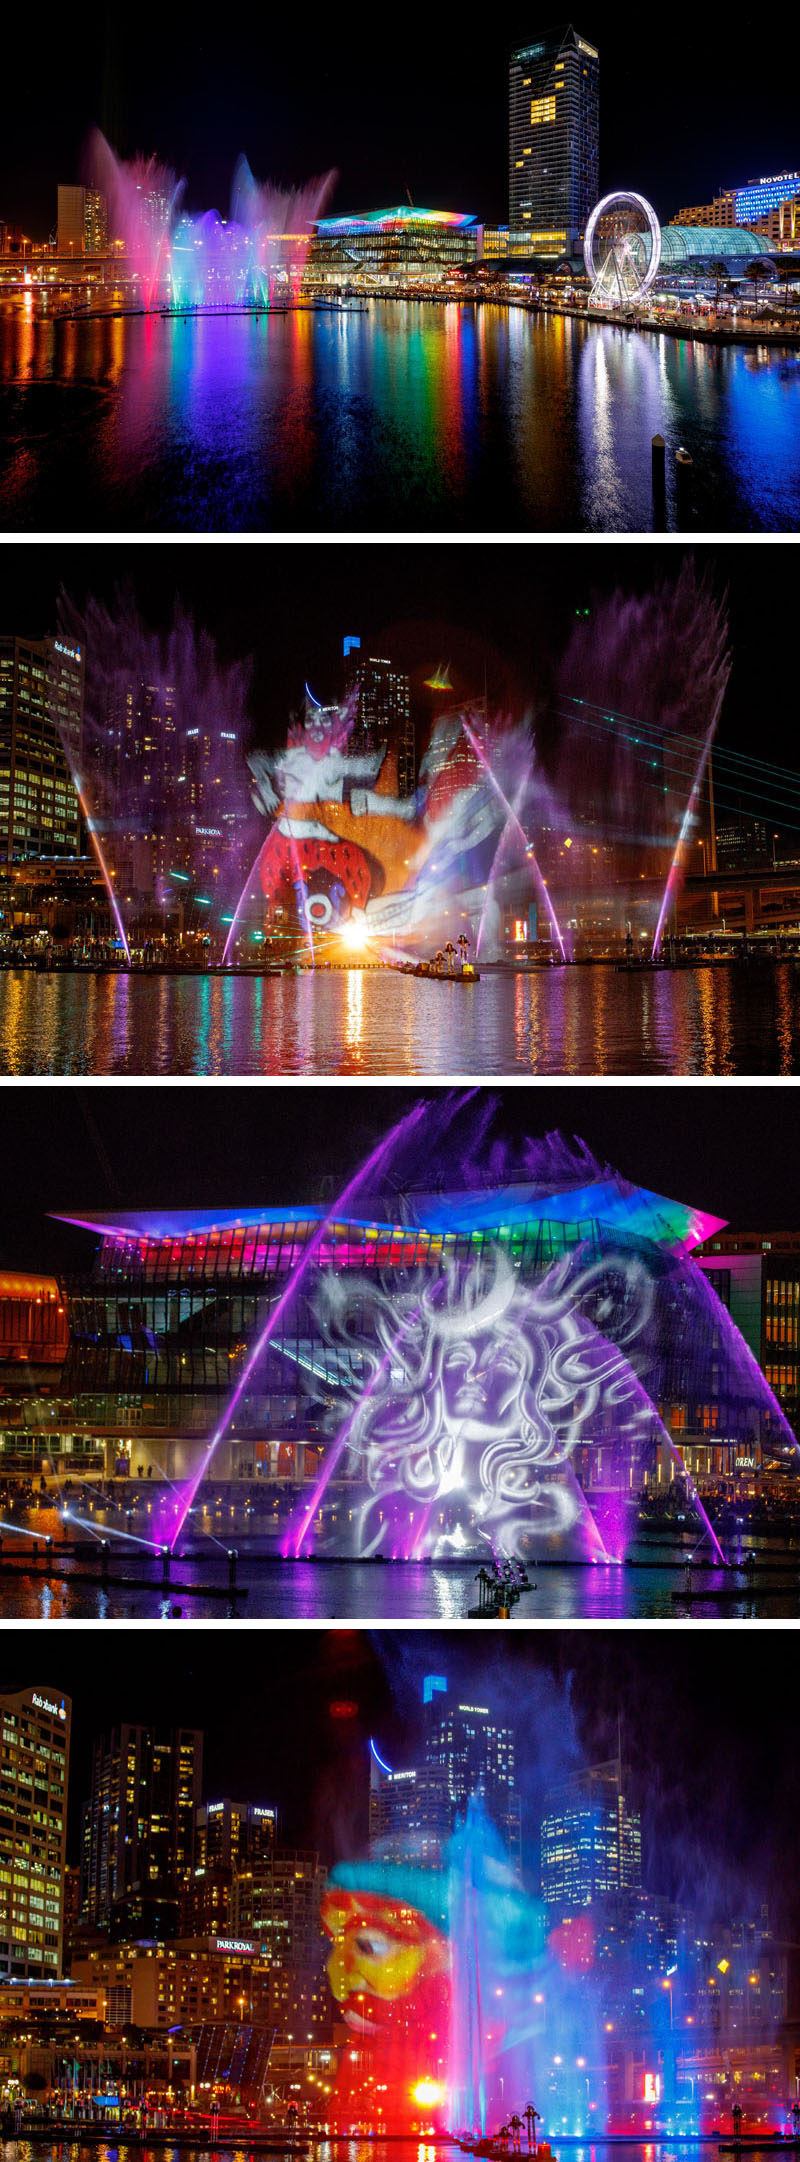 Vivid Sydney 2017, the annual light art festival is lighting up the city in bright sculptures, fun installations and colorful projections.